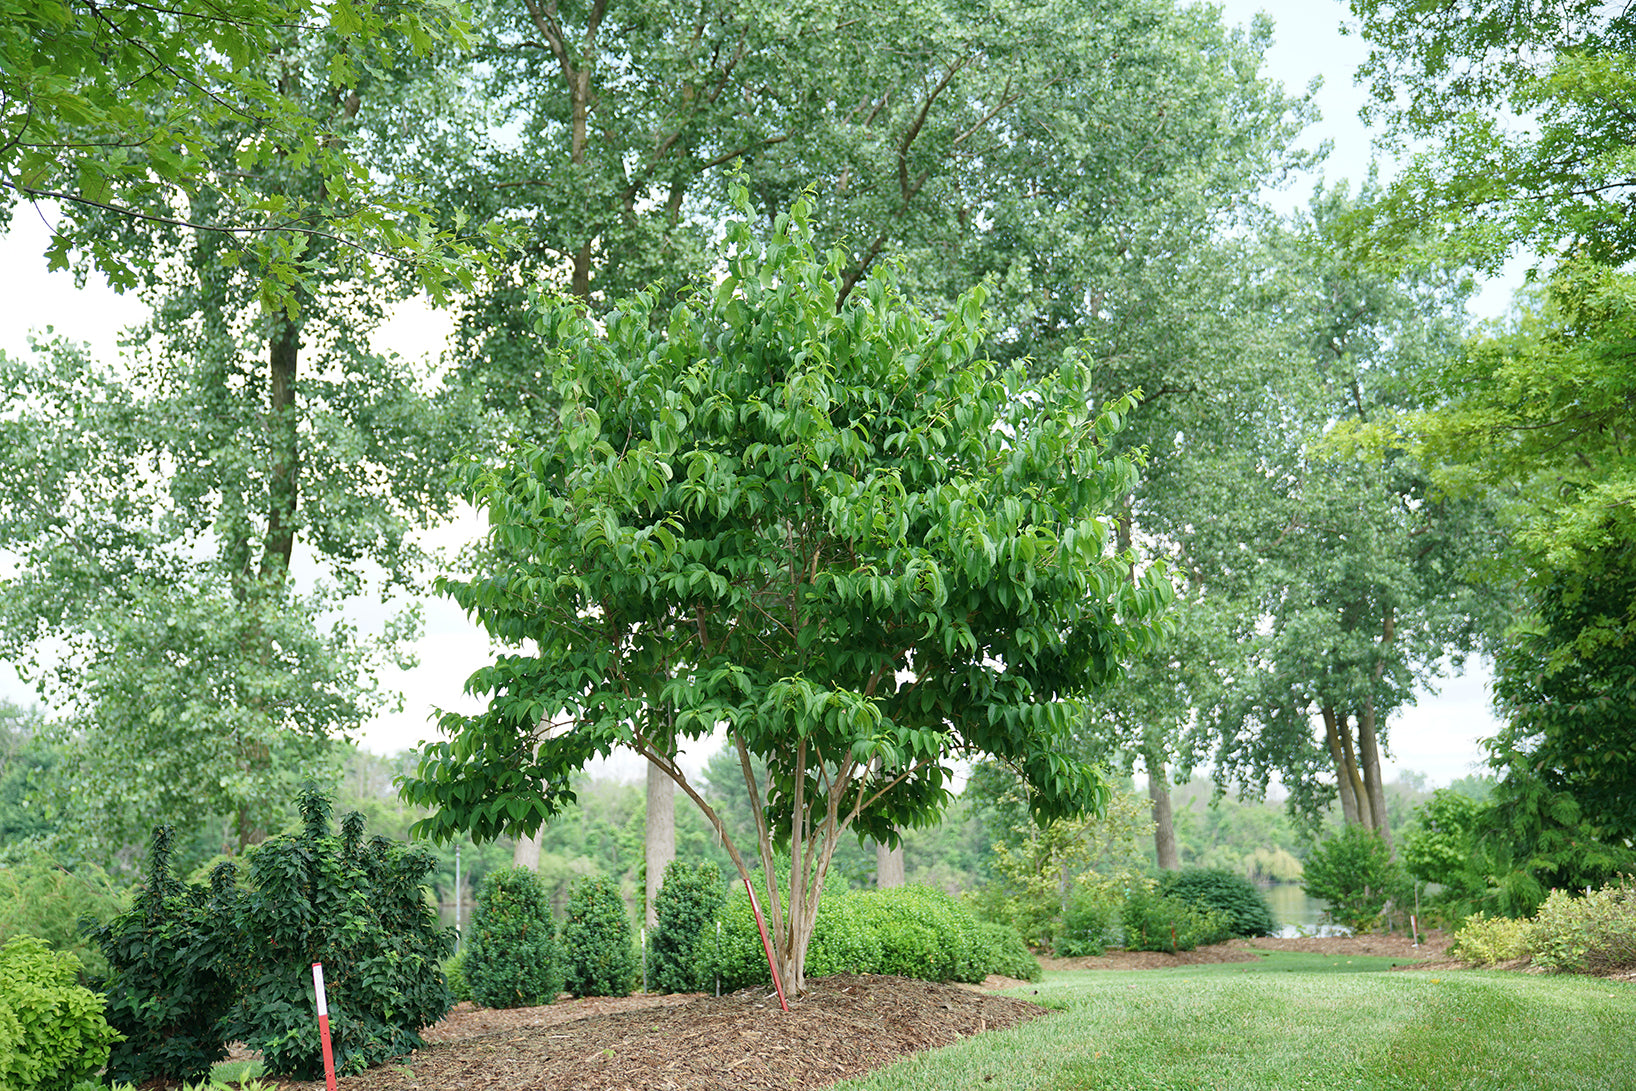 Heptacodium Temple of Bloom grows to a small tree size and is ideal for smaller yards